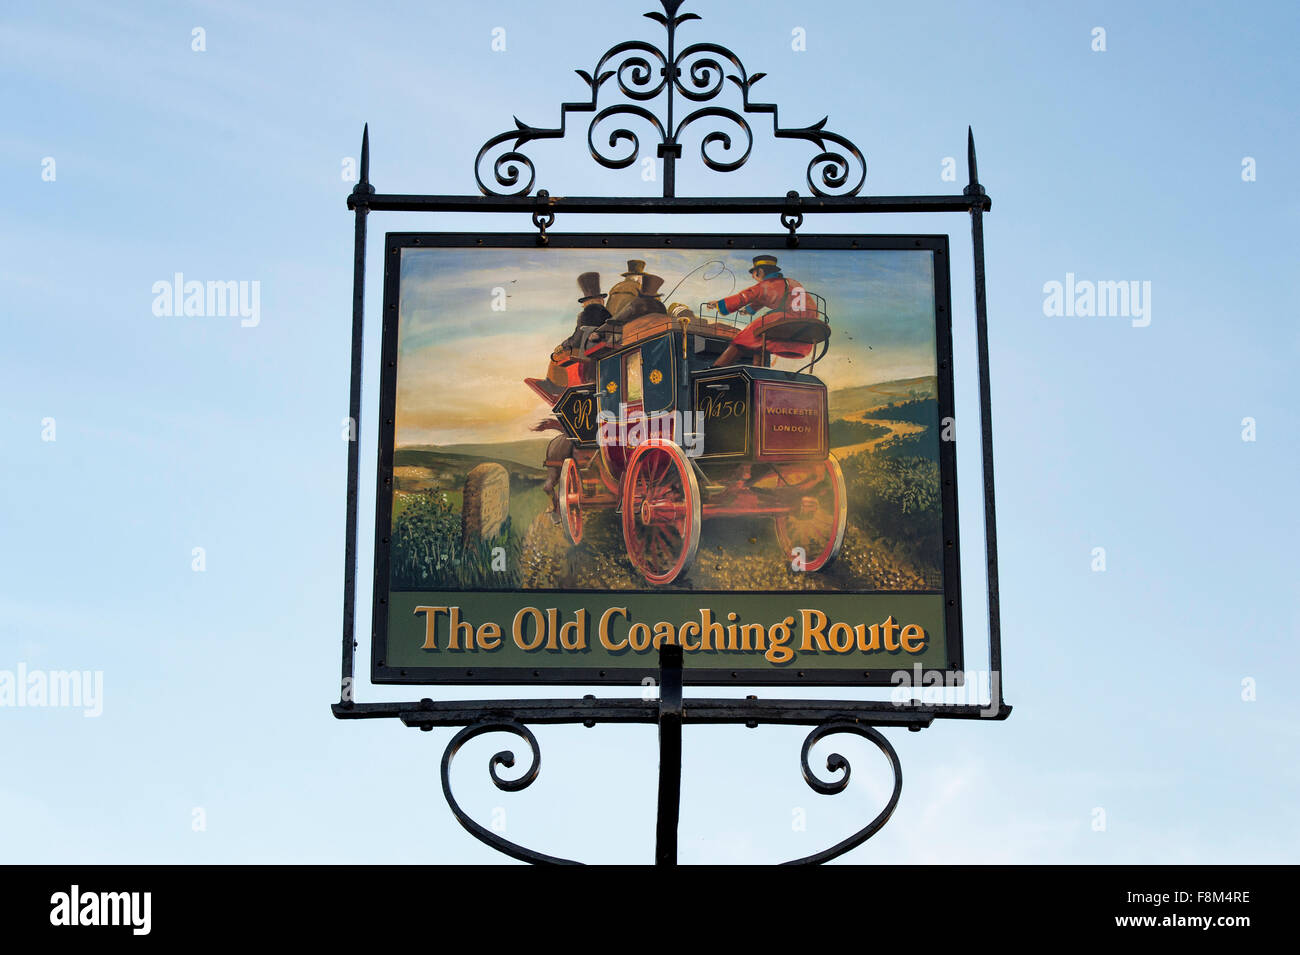 The old coaching route sign Broadway, Cotswolds, Worcestershire, England Stock Photo